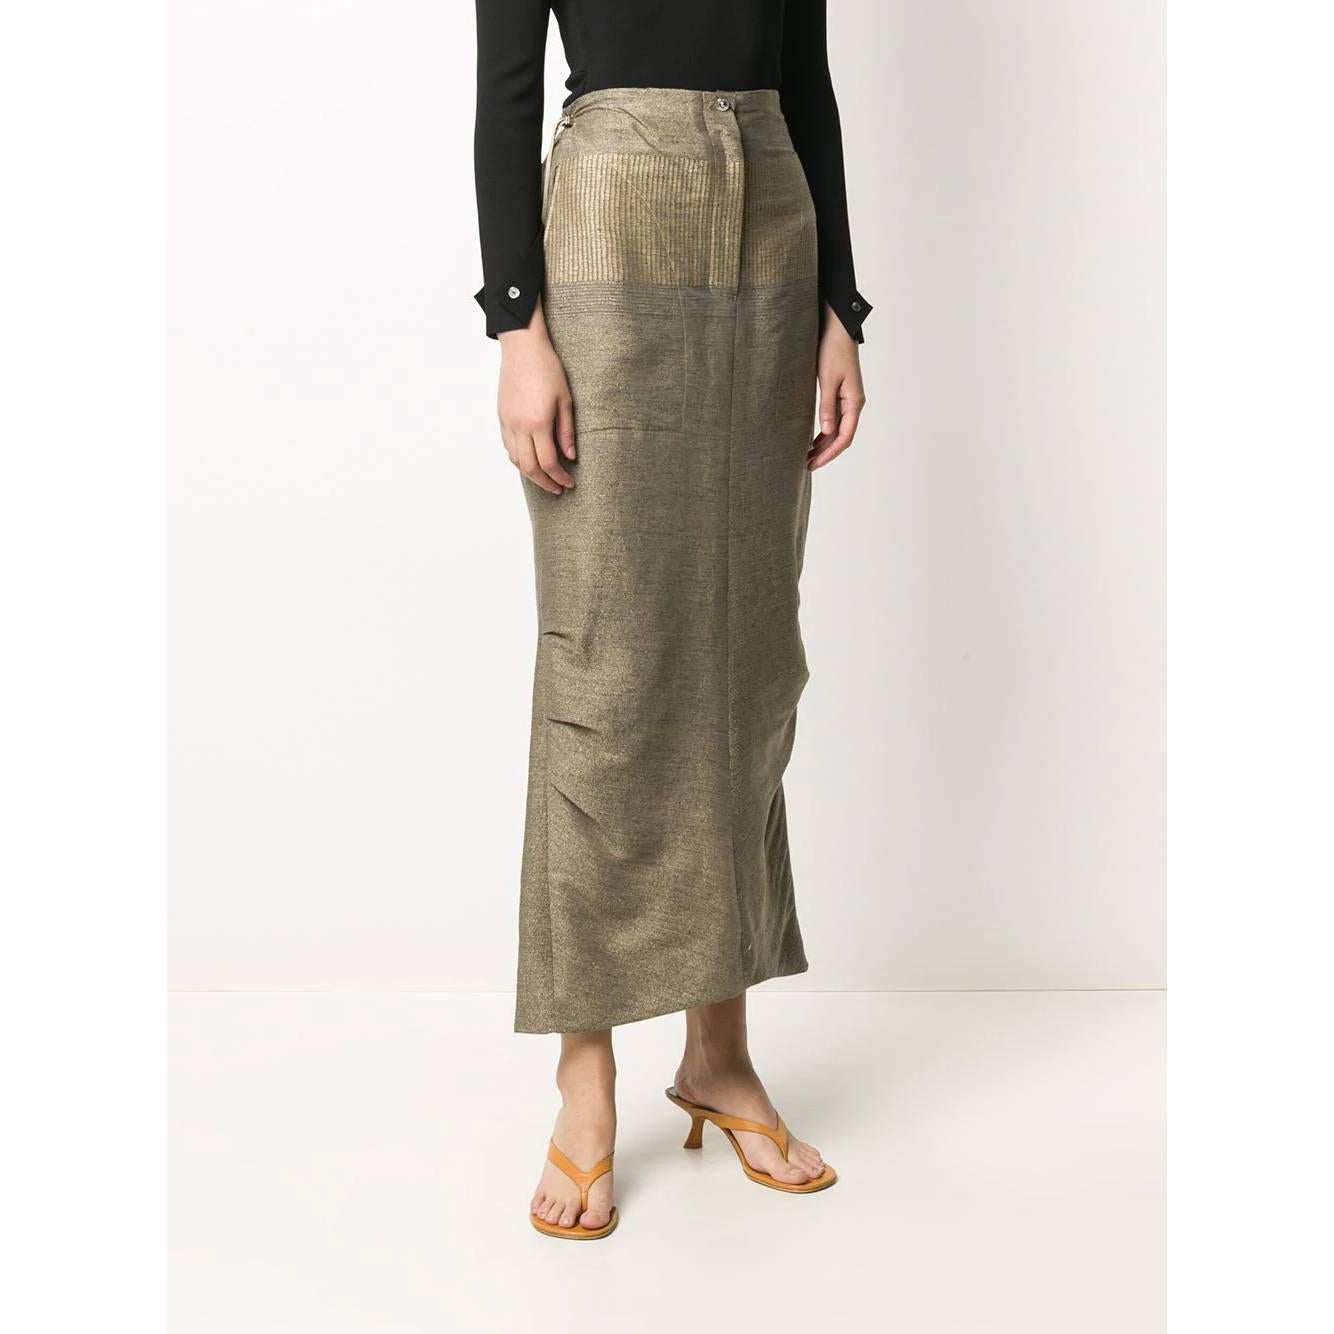 A.N.G.E.L.O. VINTAGE - Italy
Gianfranco Ferré gray and gold cotton skirt. Straight model with high waist. Front closure with button and zip and adjustable drawstring at the waist. Side drapes and back vent.

This item belongs to a deadstock, it has